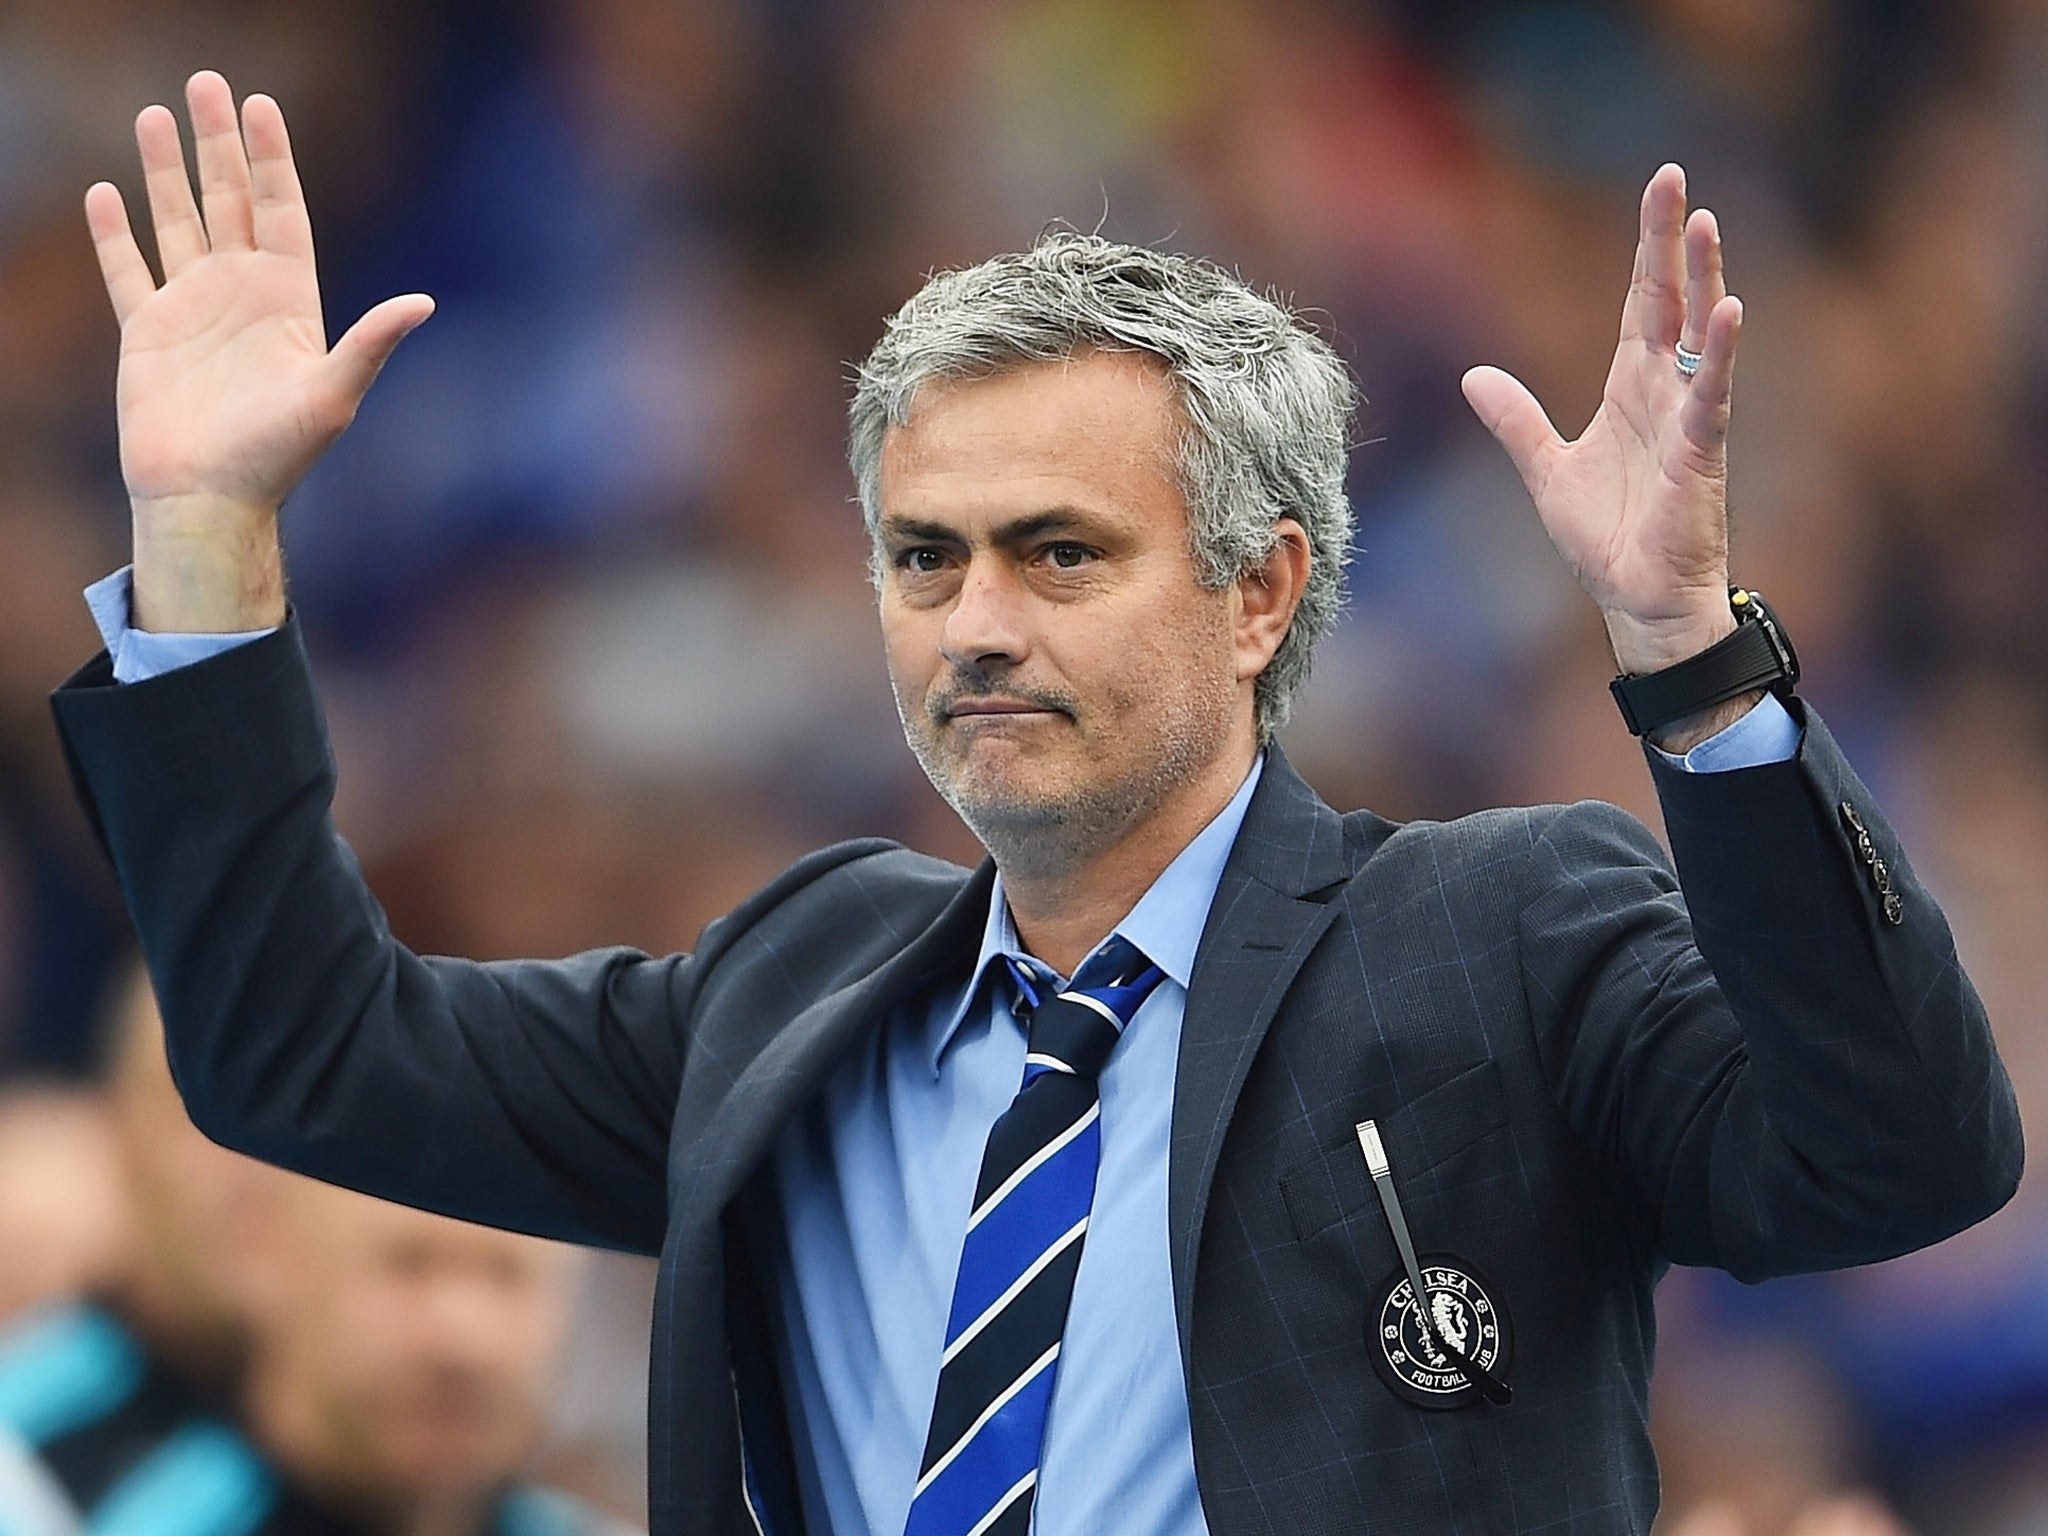 Could Jose Mourinho become a hit at Manchester United, of course he could